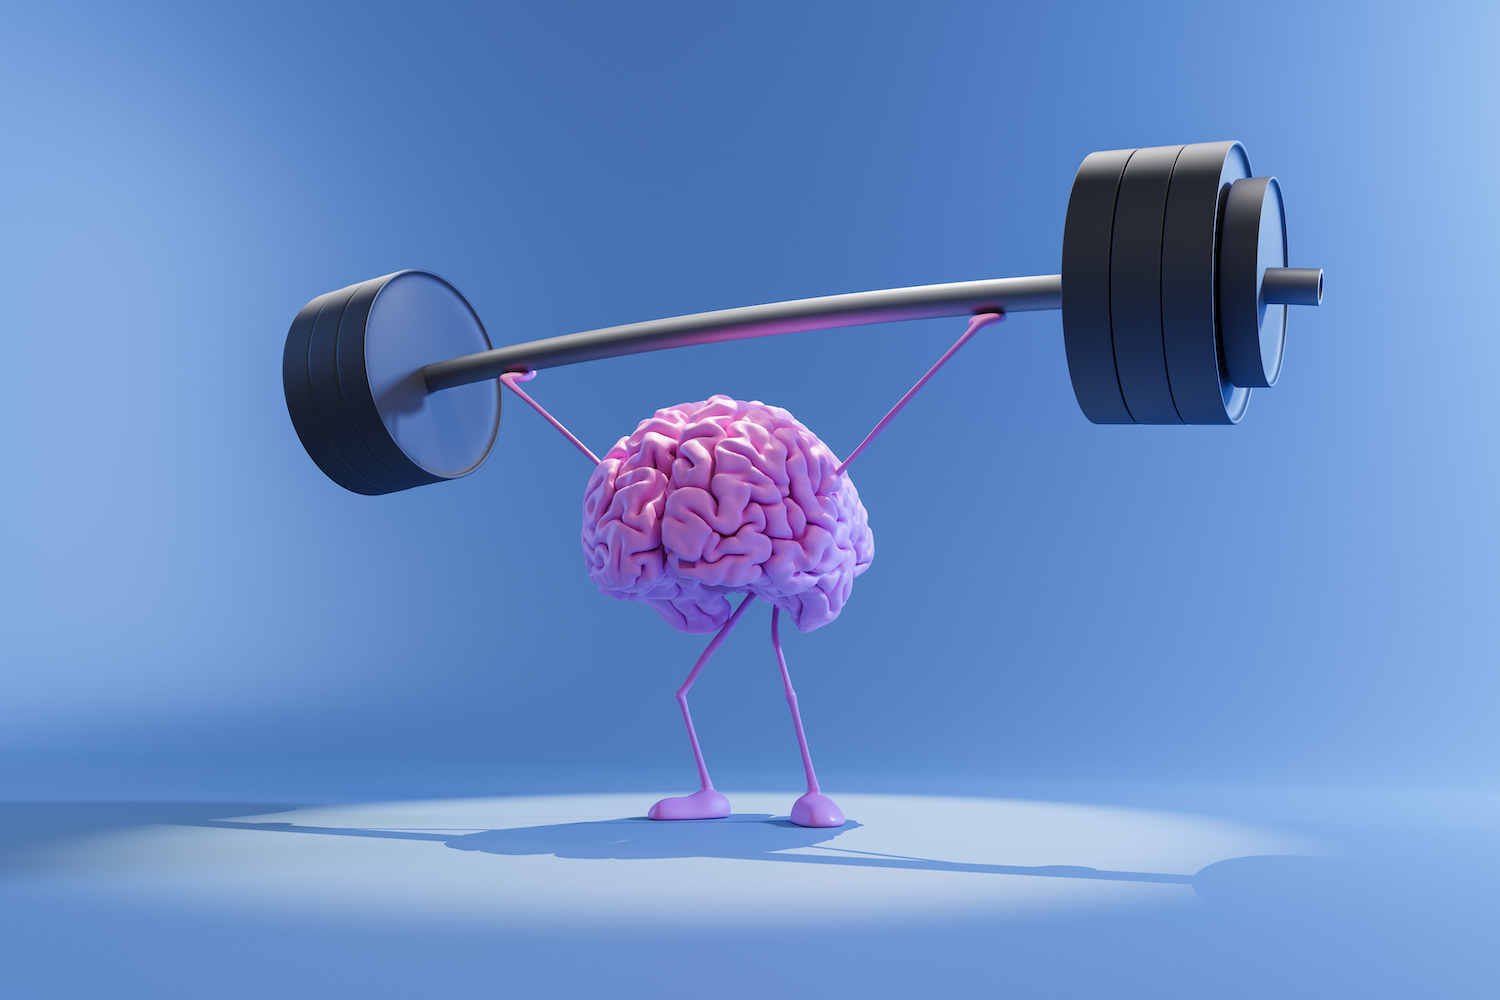 3D illustration of human brain in pink color lifting heavy barbell.  Education mind and mental health concept.  Activate your brain.